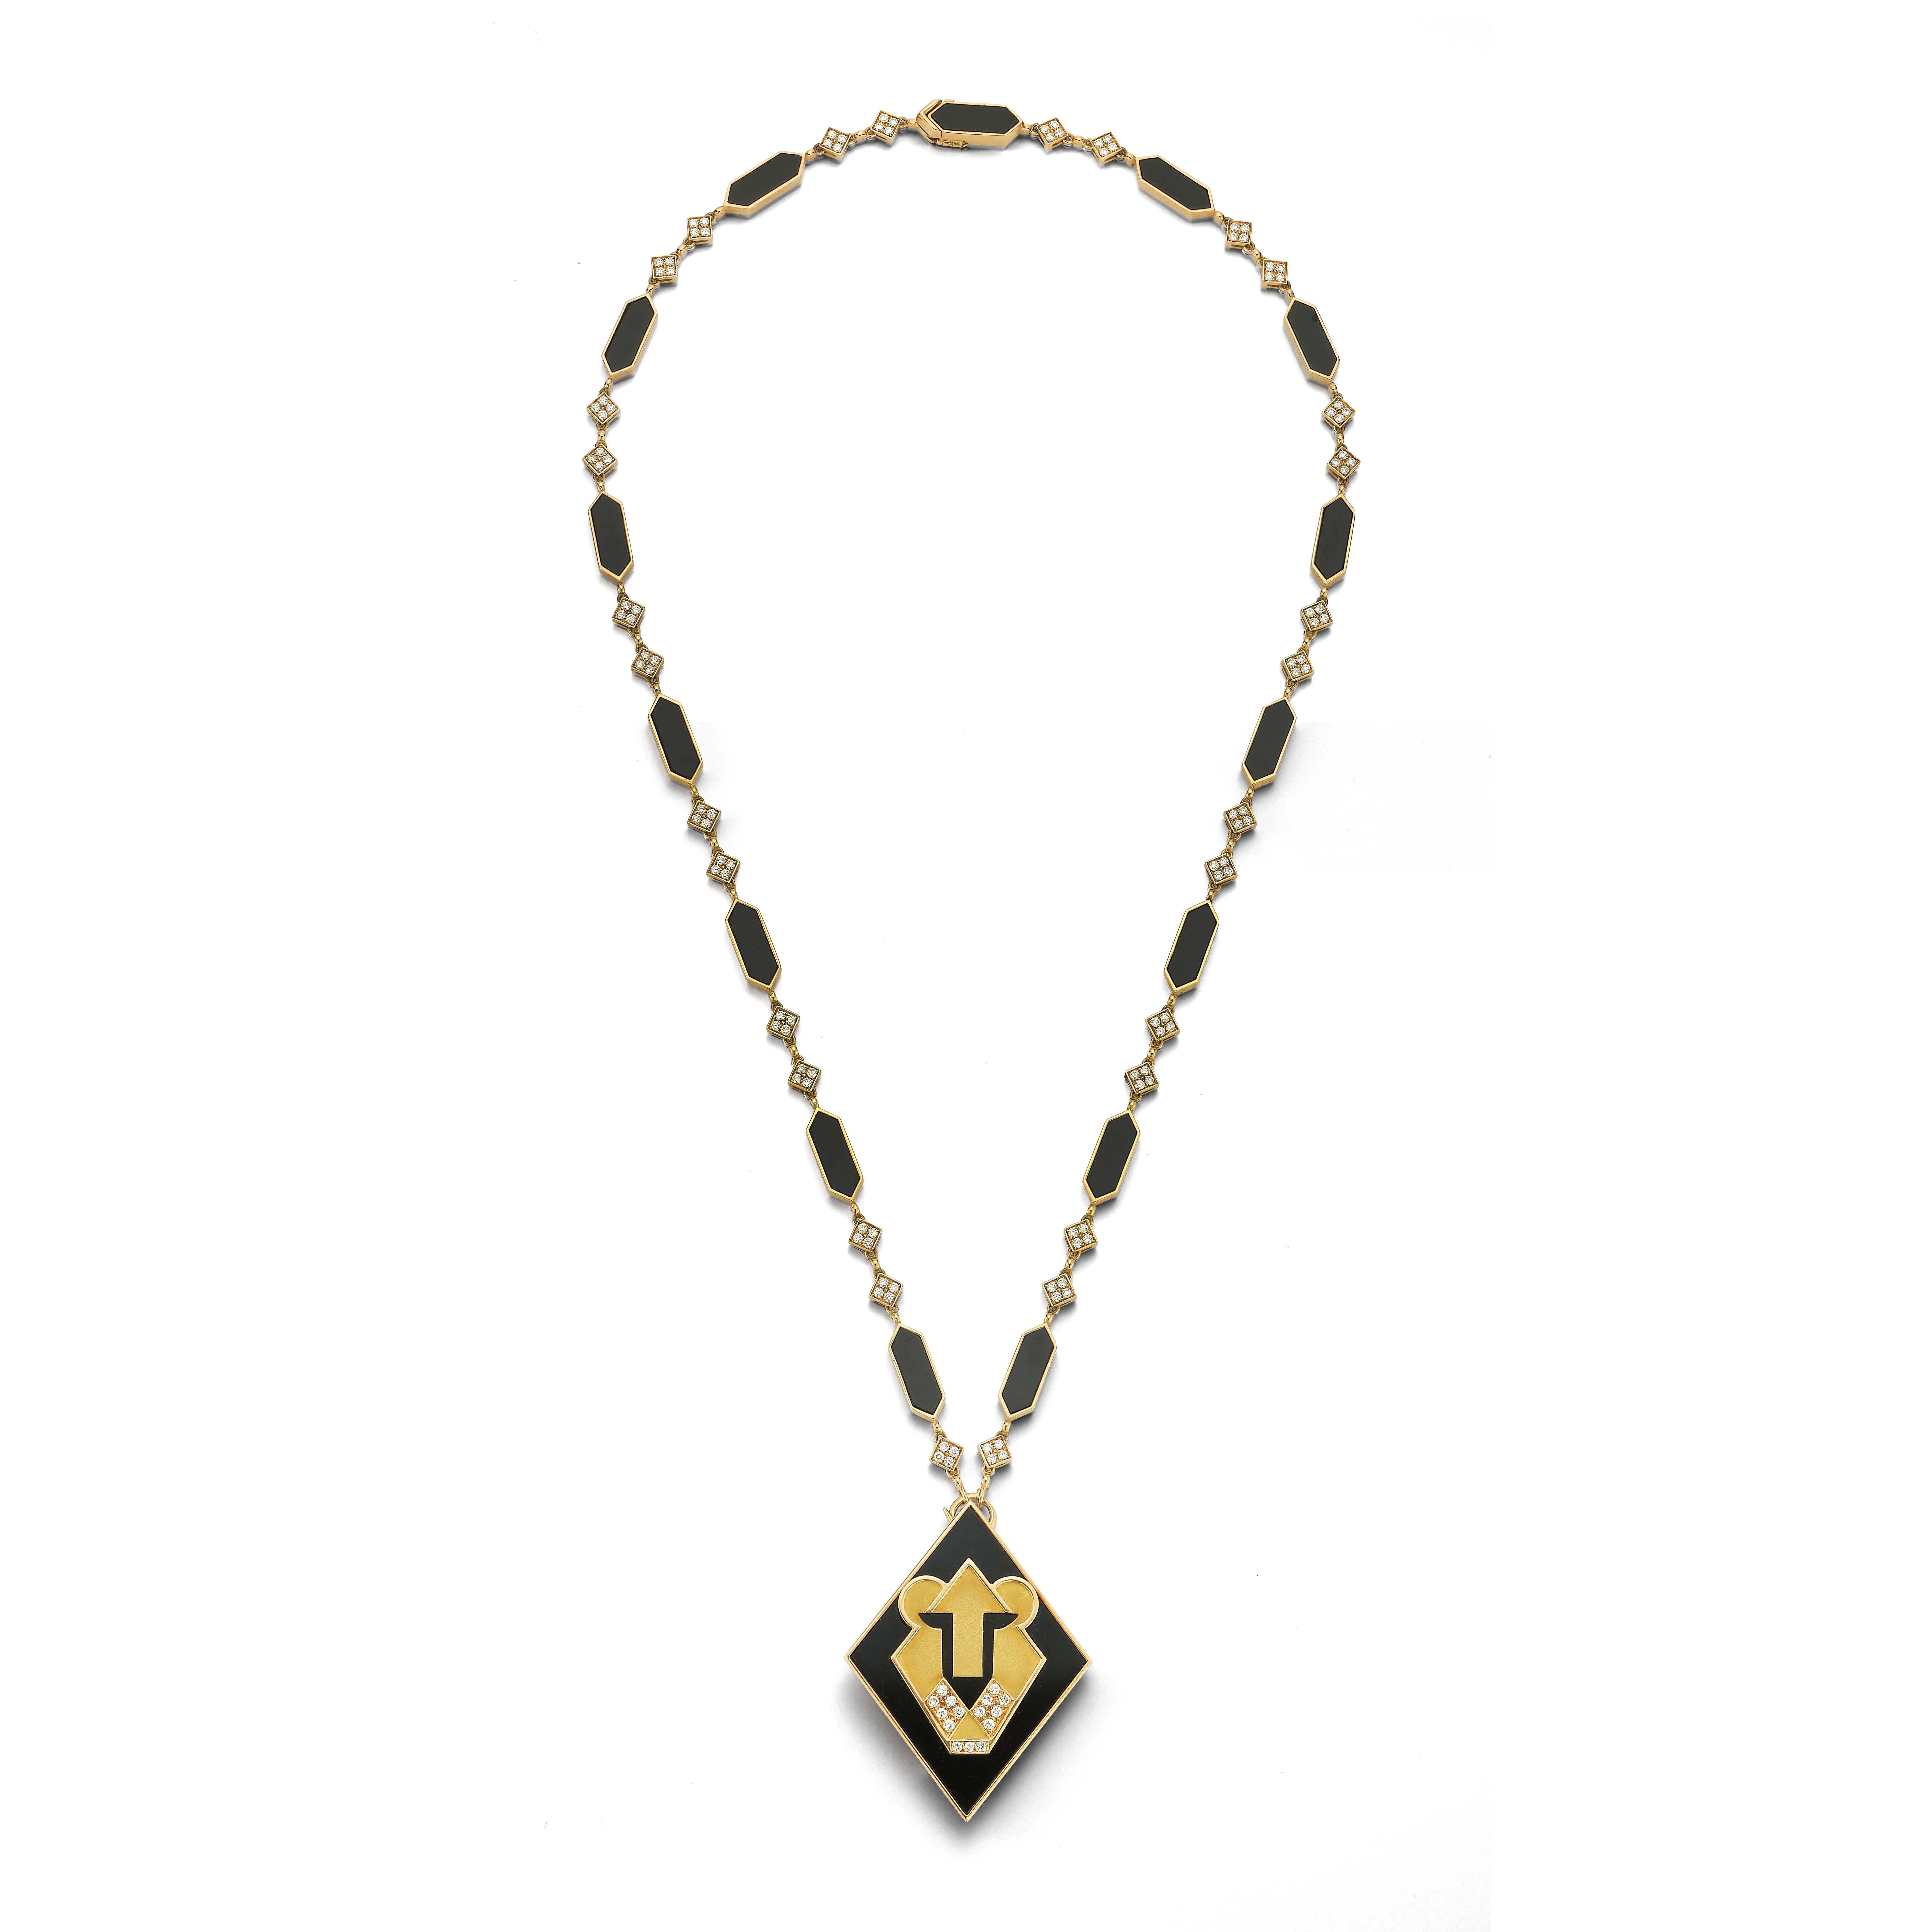 Extremely Rare Bulgari Onyx & Diamond Lion Necklace 

A gold pendant set with onyx and 15 round diamonds in the design of a lion, with a gold chain of onyx and an additional 120 round diamonds

Chain length: 24